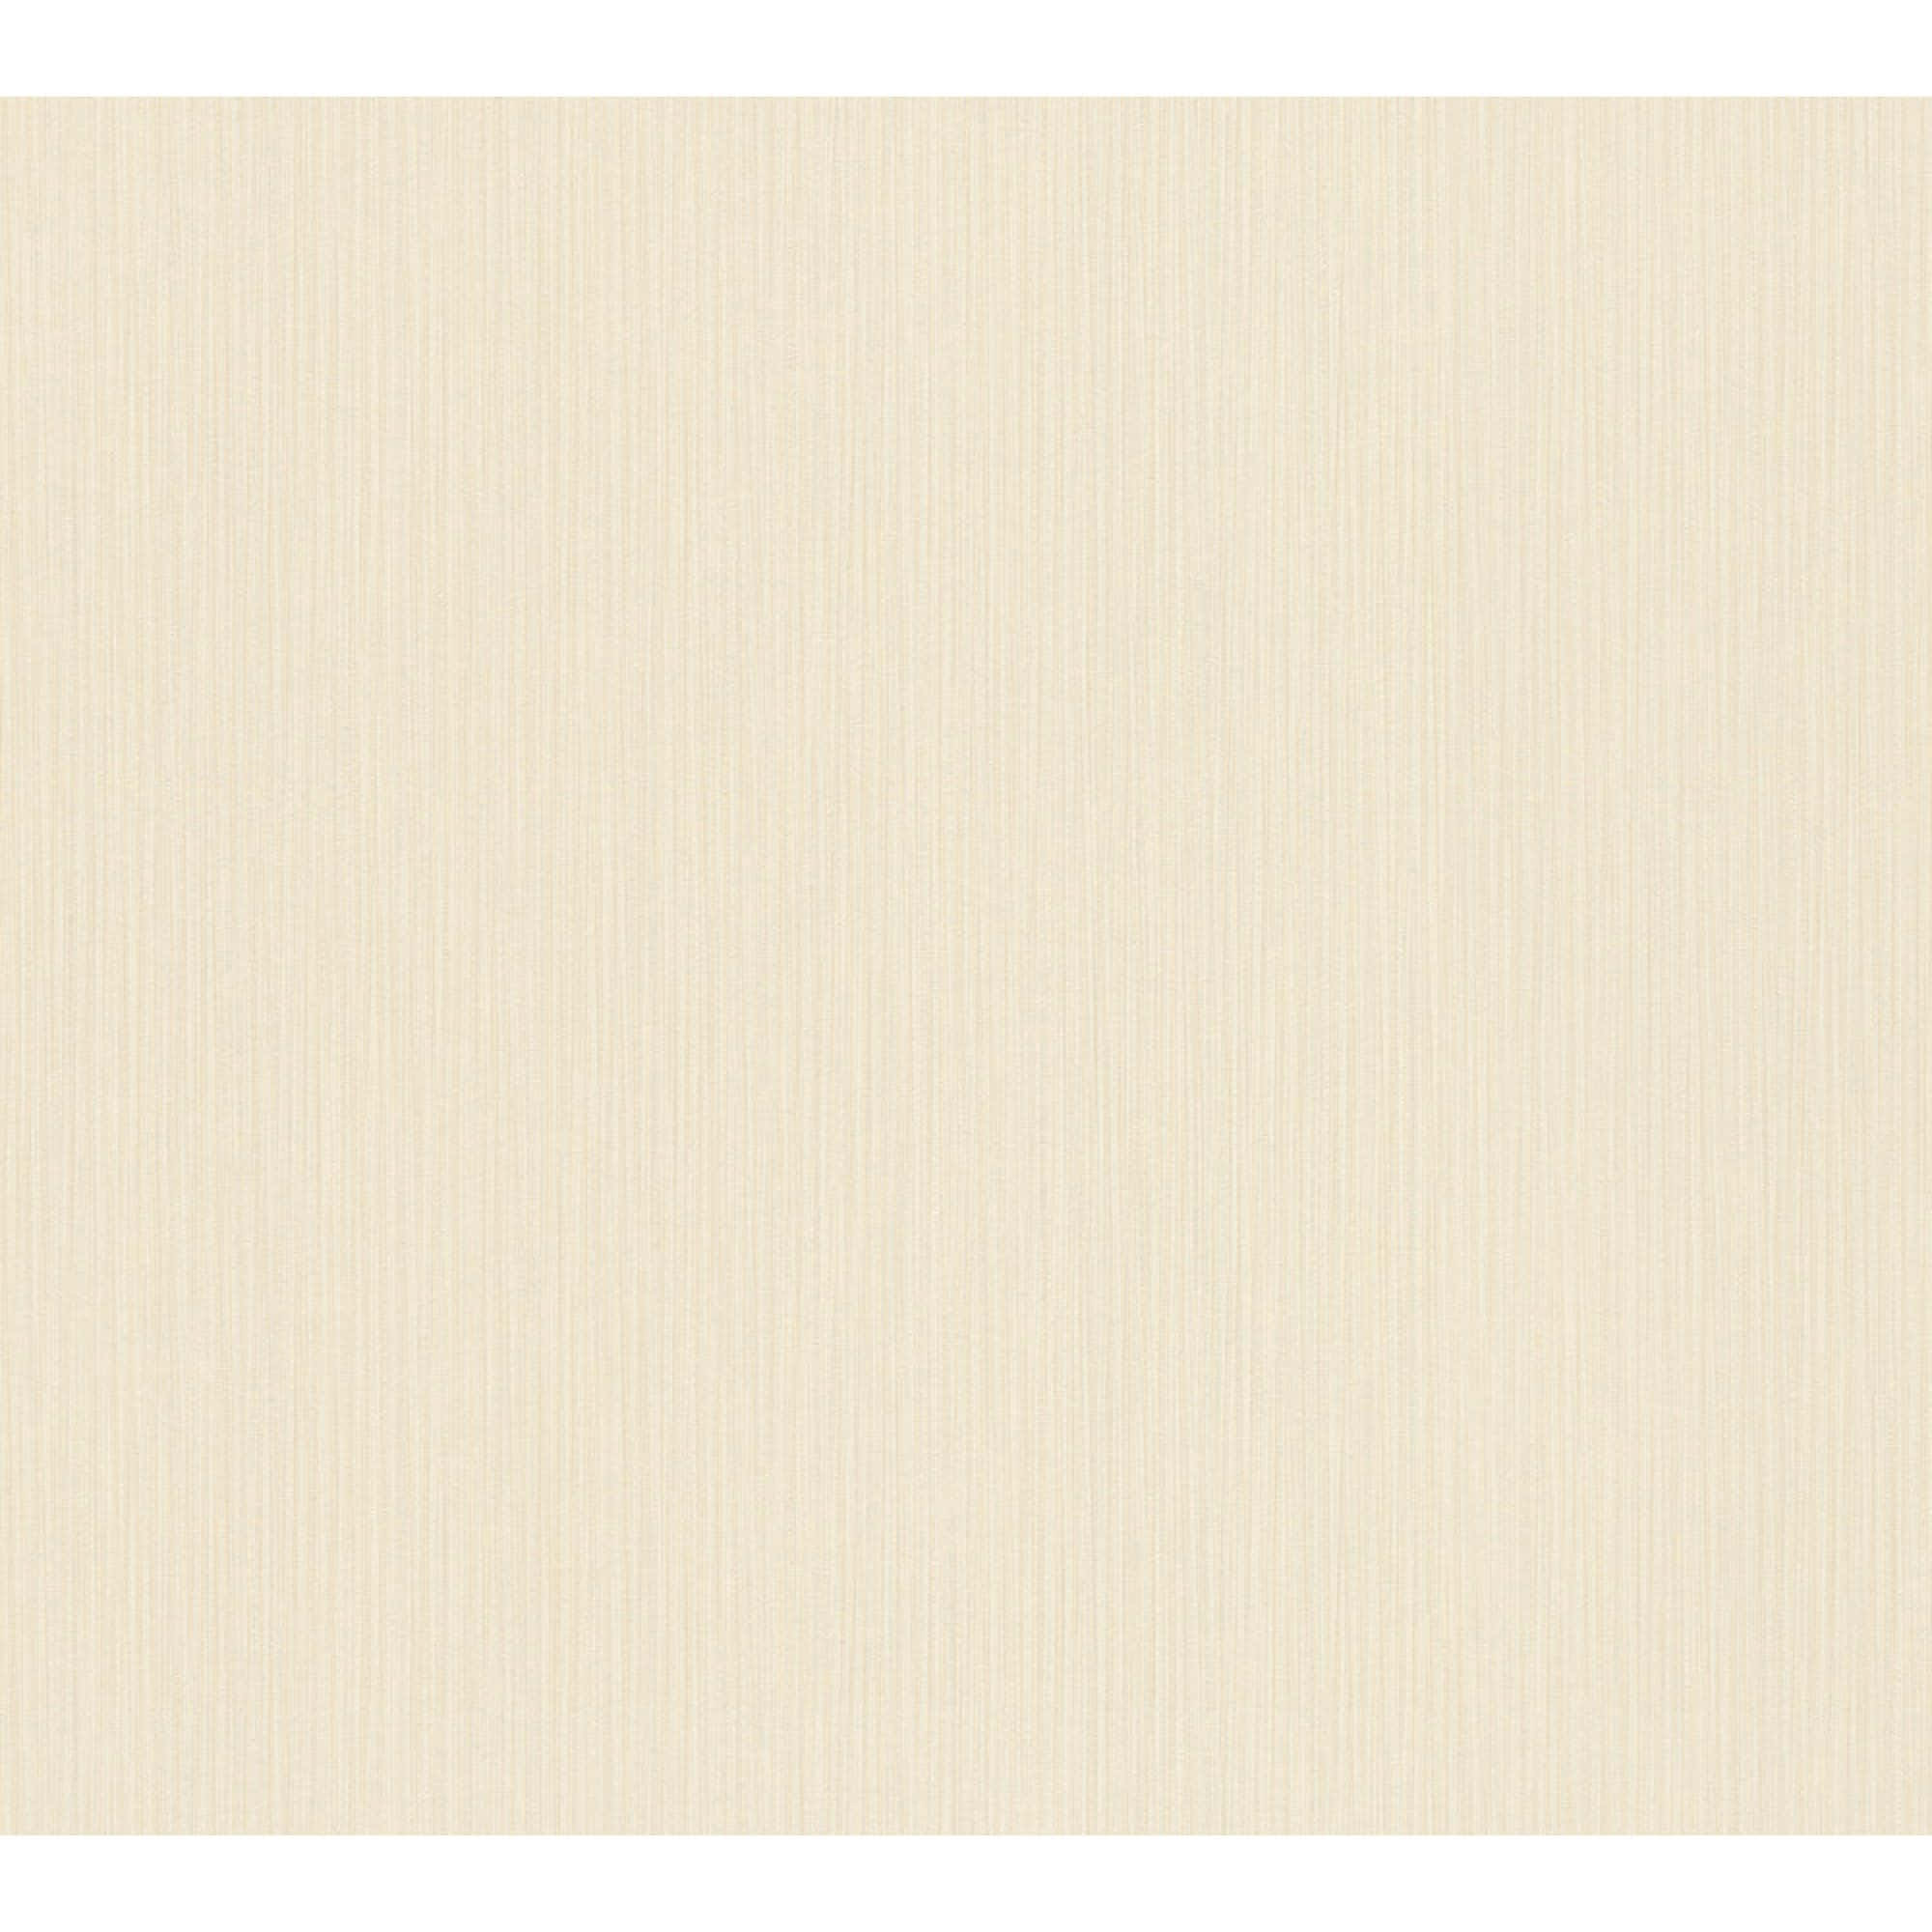 Cream Color Background Small Lines